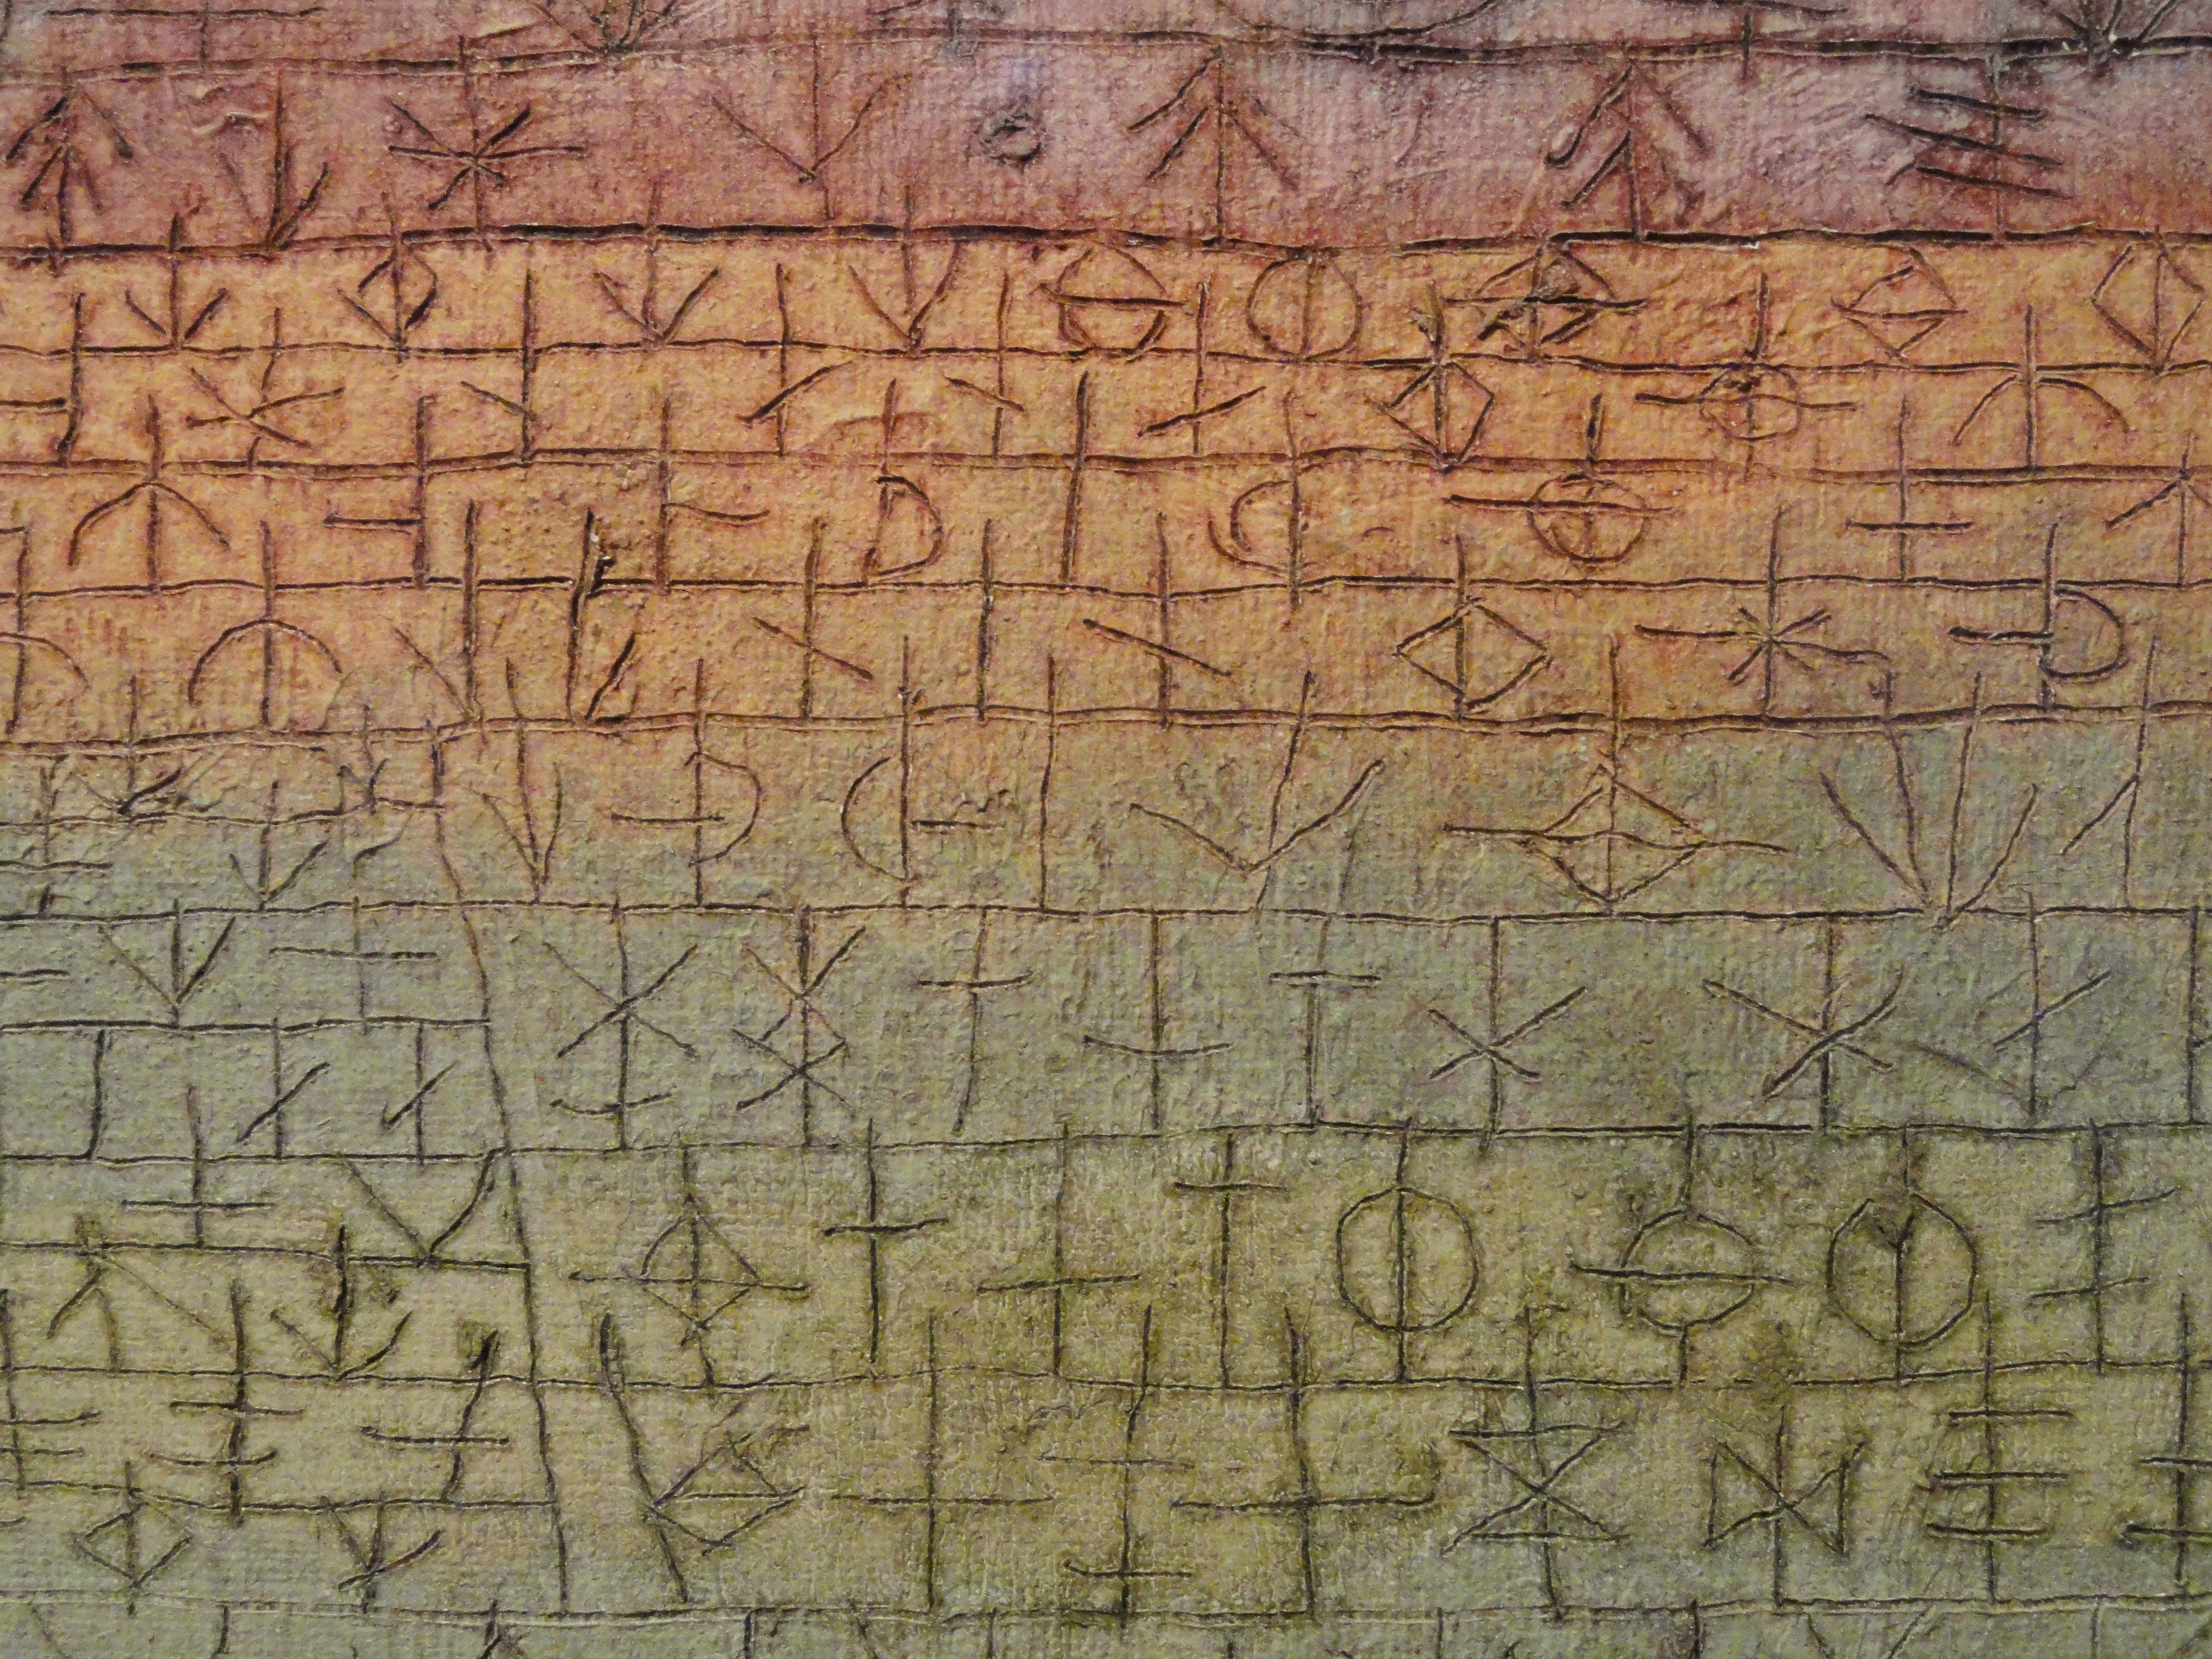 Tree Nursery, Paul Klee, 1929, oil on incised gesso on canvas (detail) - Phillips Collection - DSC04897